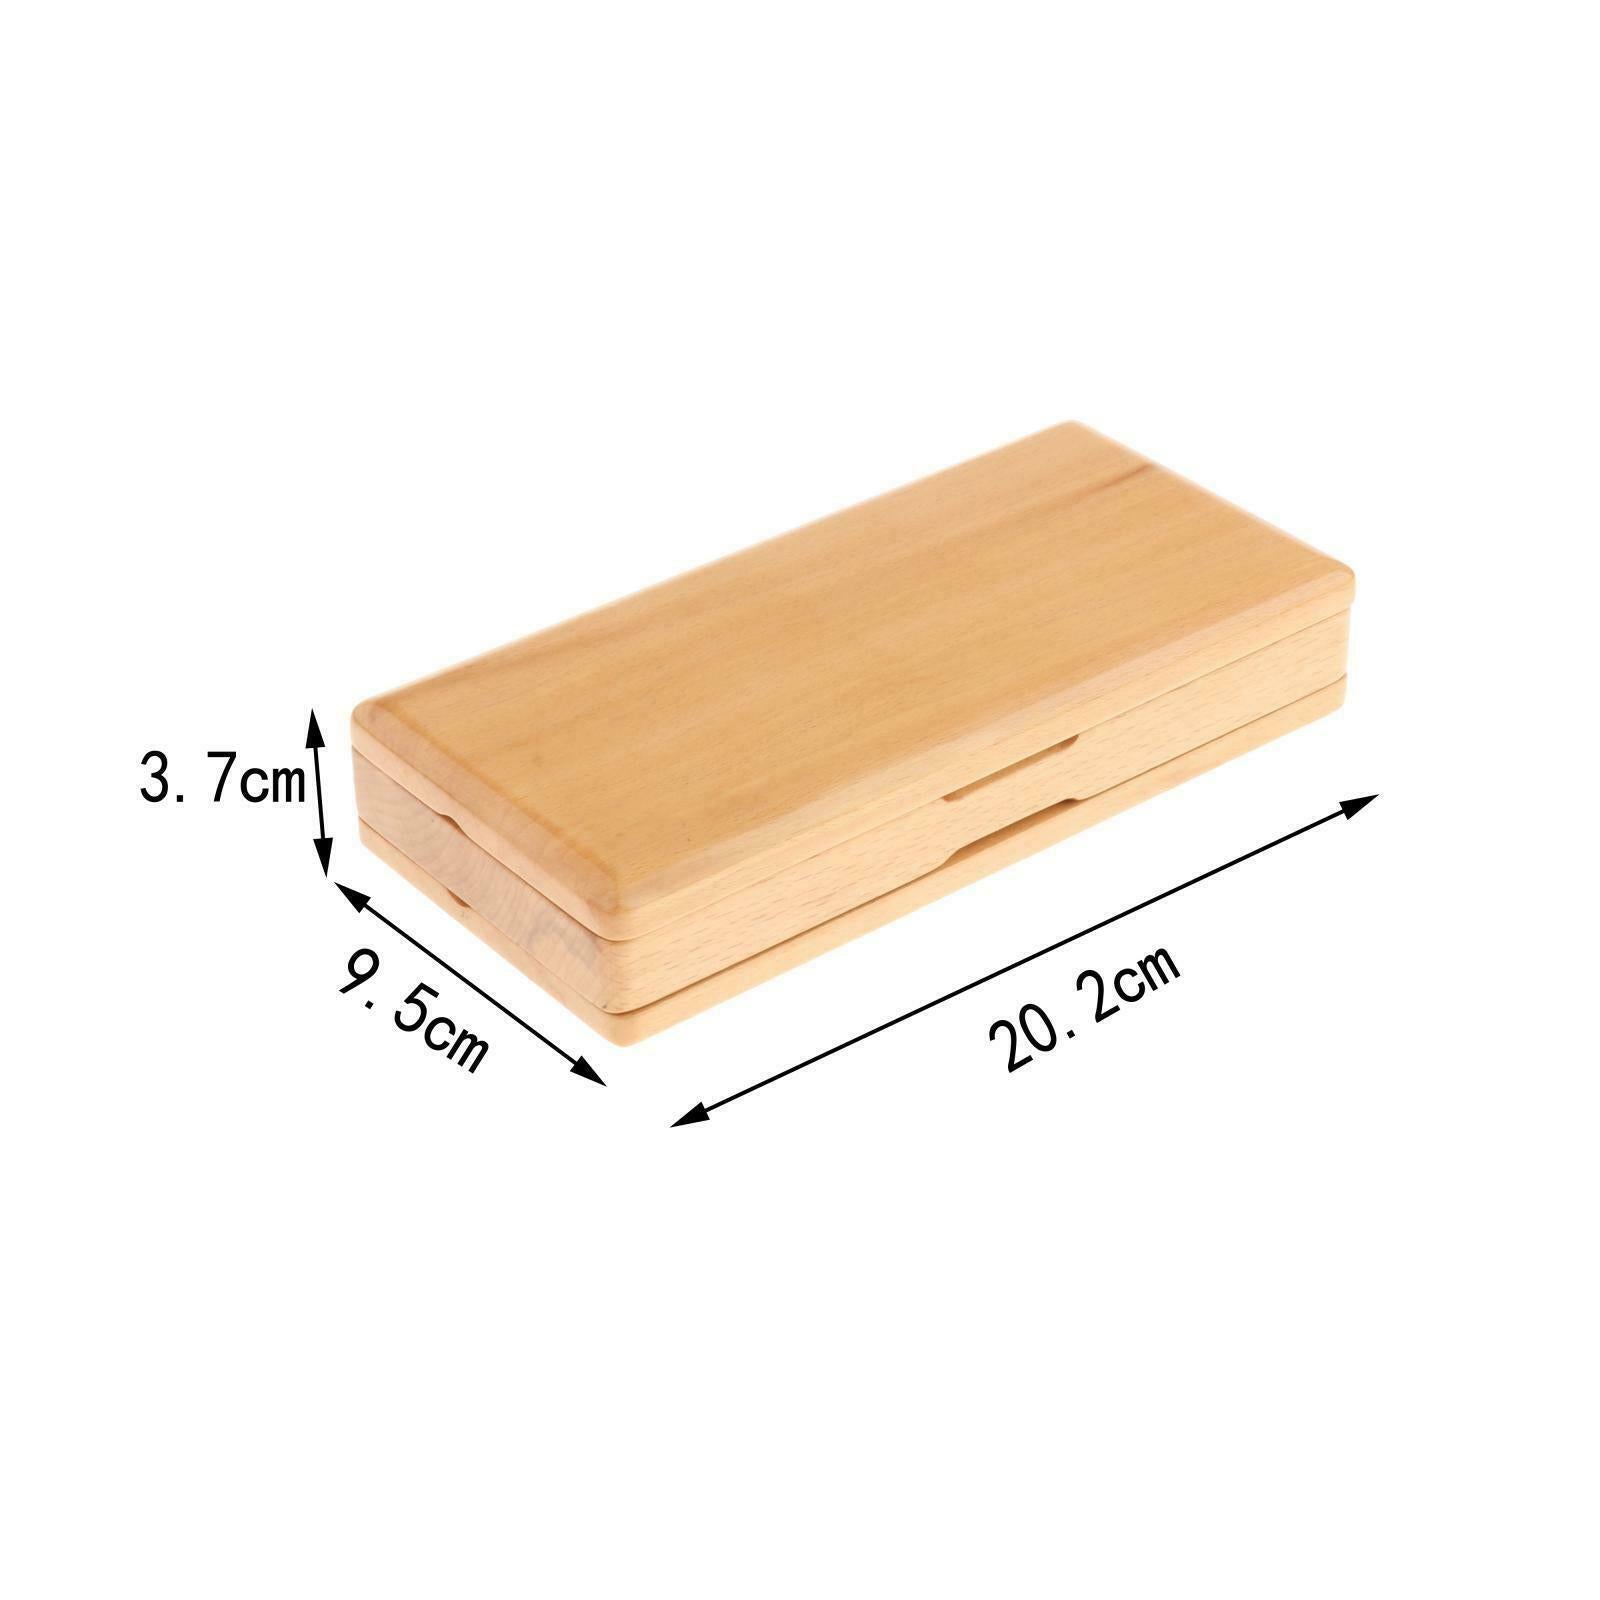 Solid Wood Oboe Reed Case Wooden Holder for Oboe Store 40 Reeds 20x9.3x3.7cm